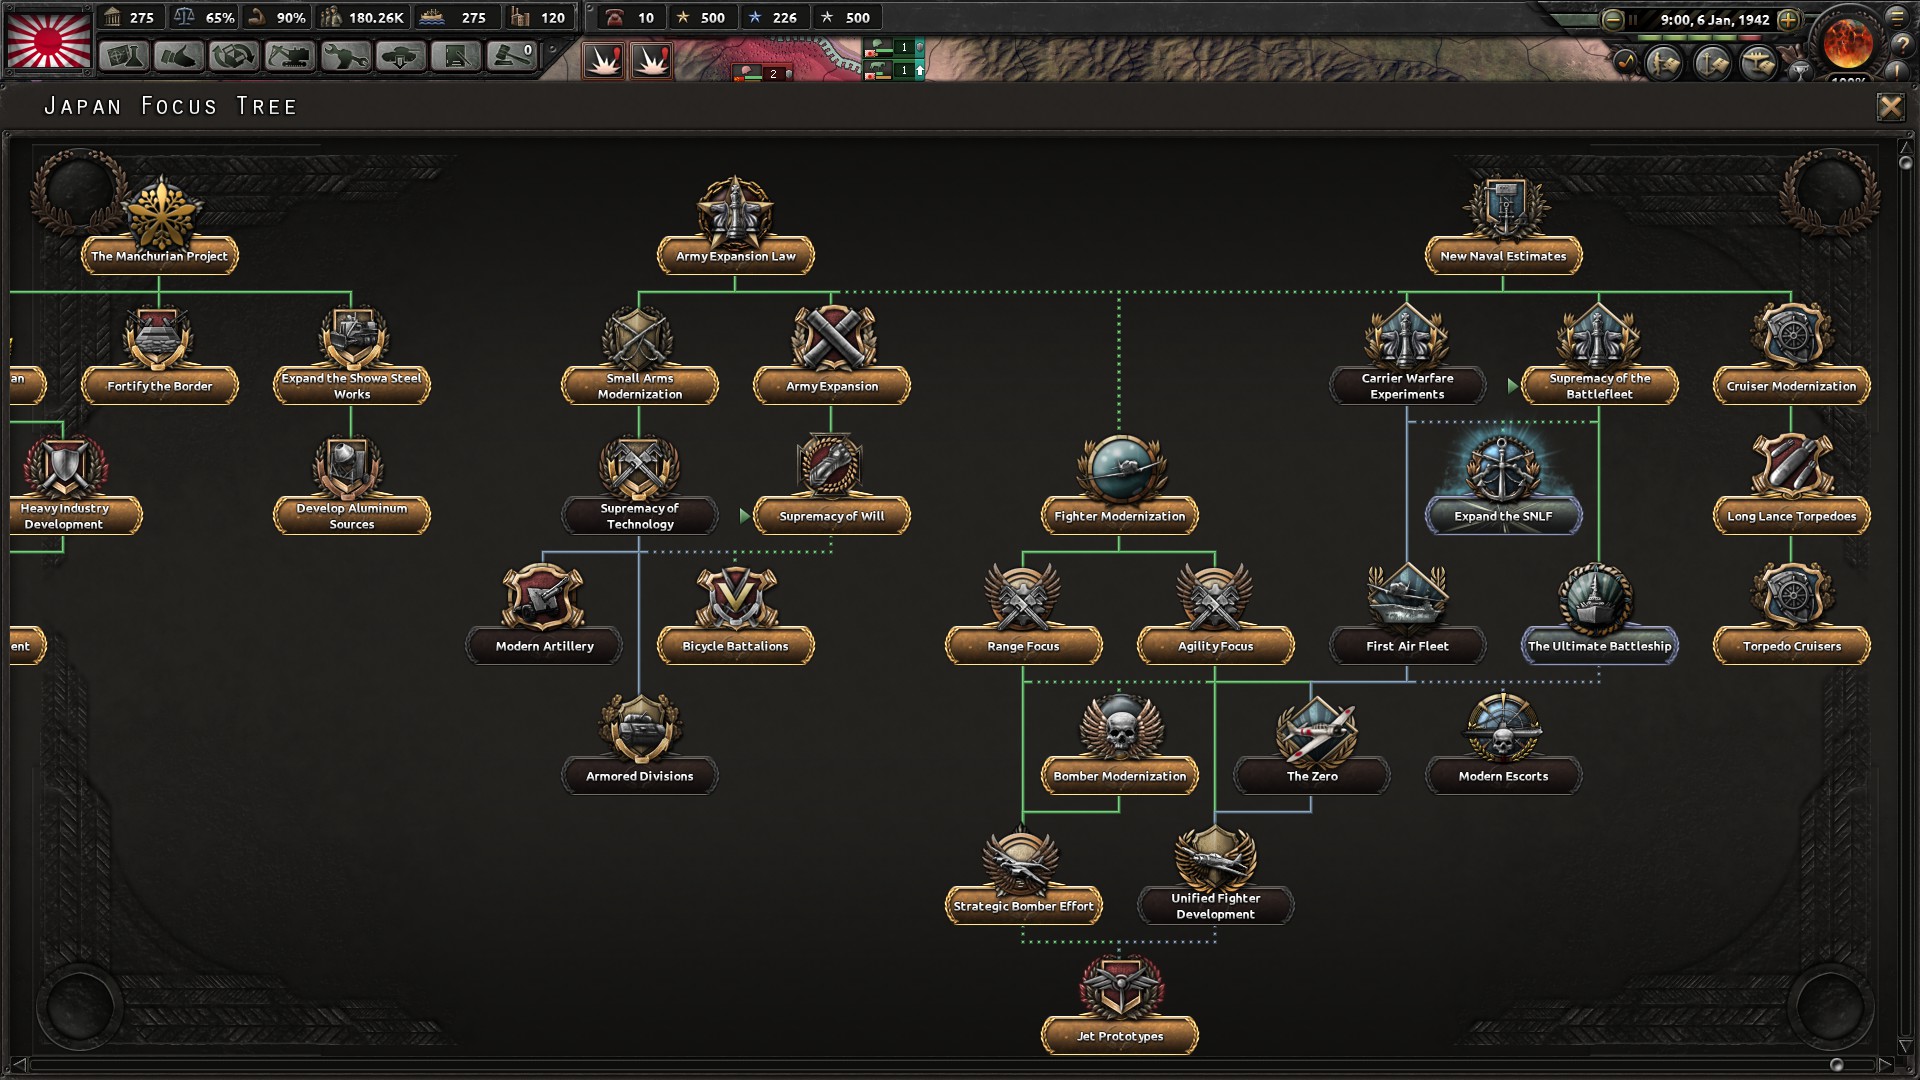 Expansion - Hearts of Iron IV: Waking the Tiger Featured Screenshot #1